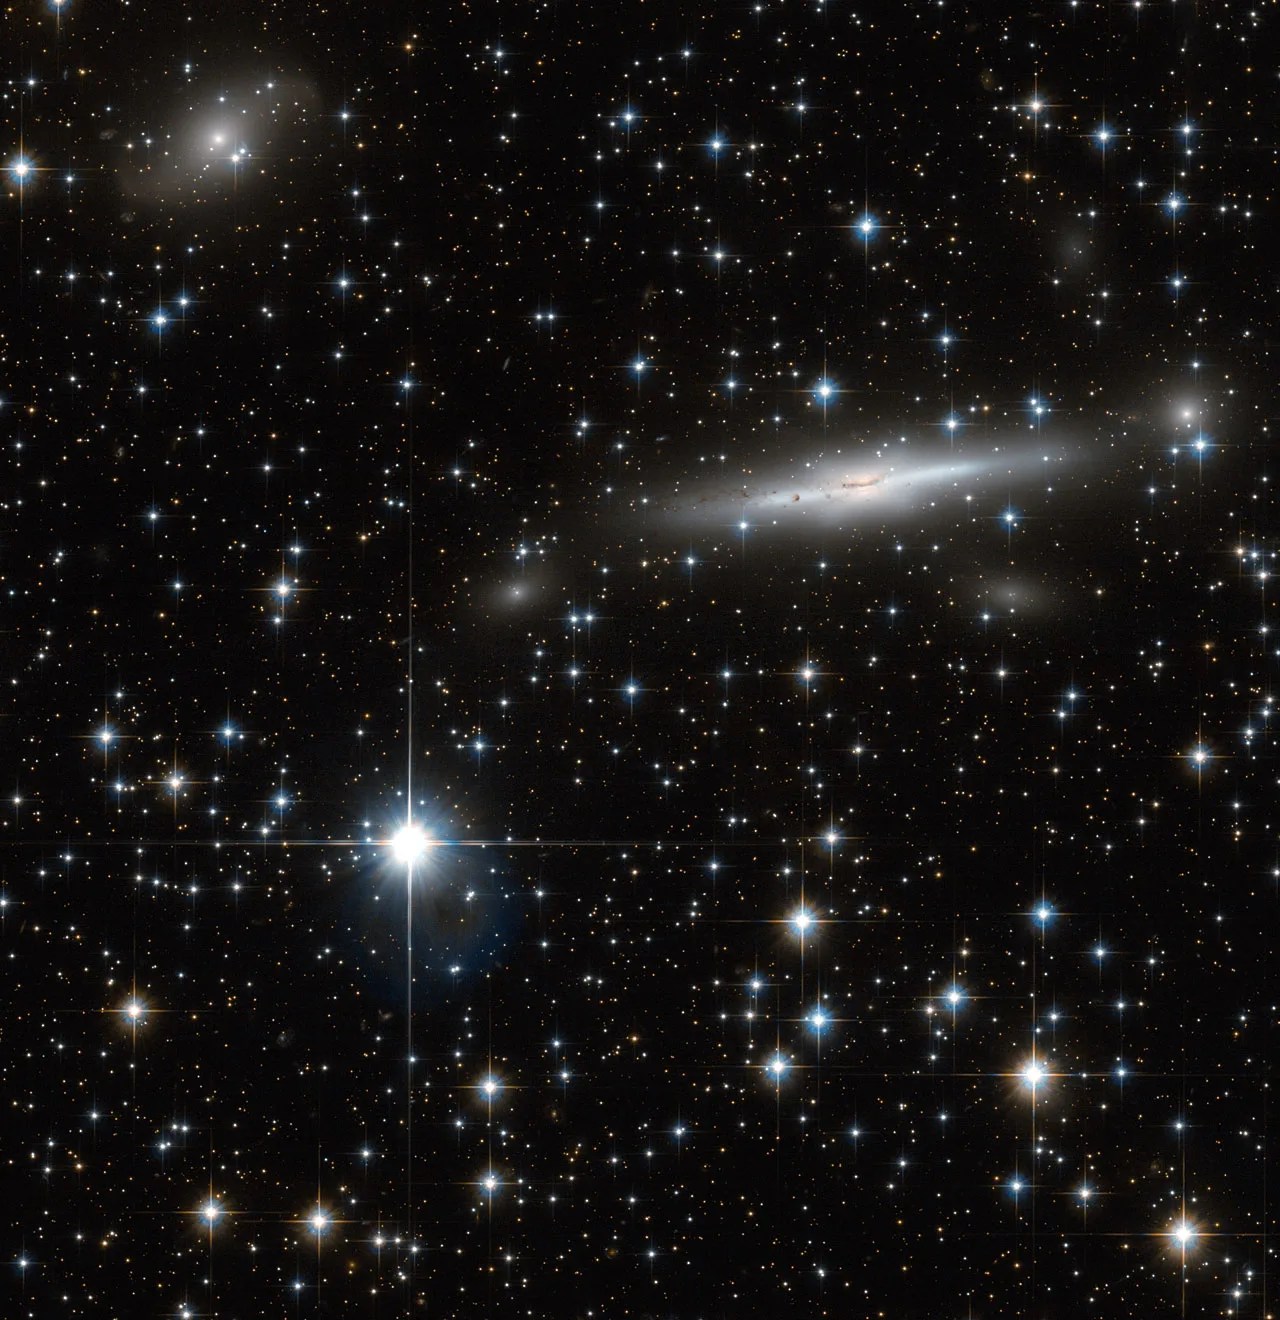 a spiral galaxy streaks across the upper right, flanked by a bright star lower left beneath a hazy smaller galaxy